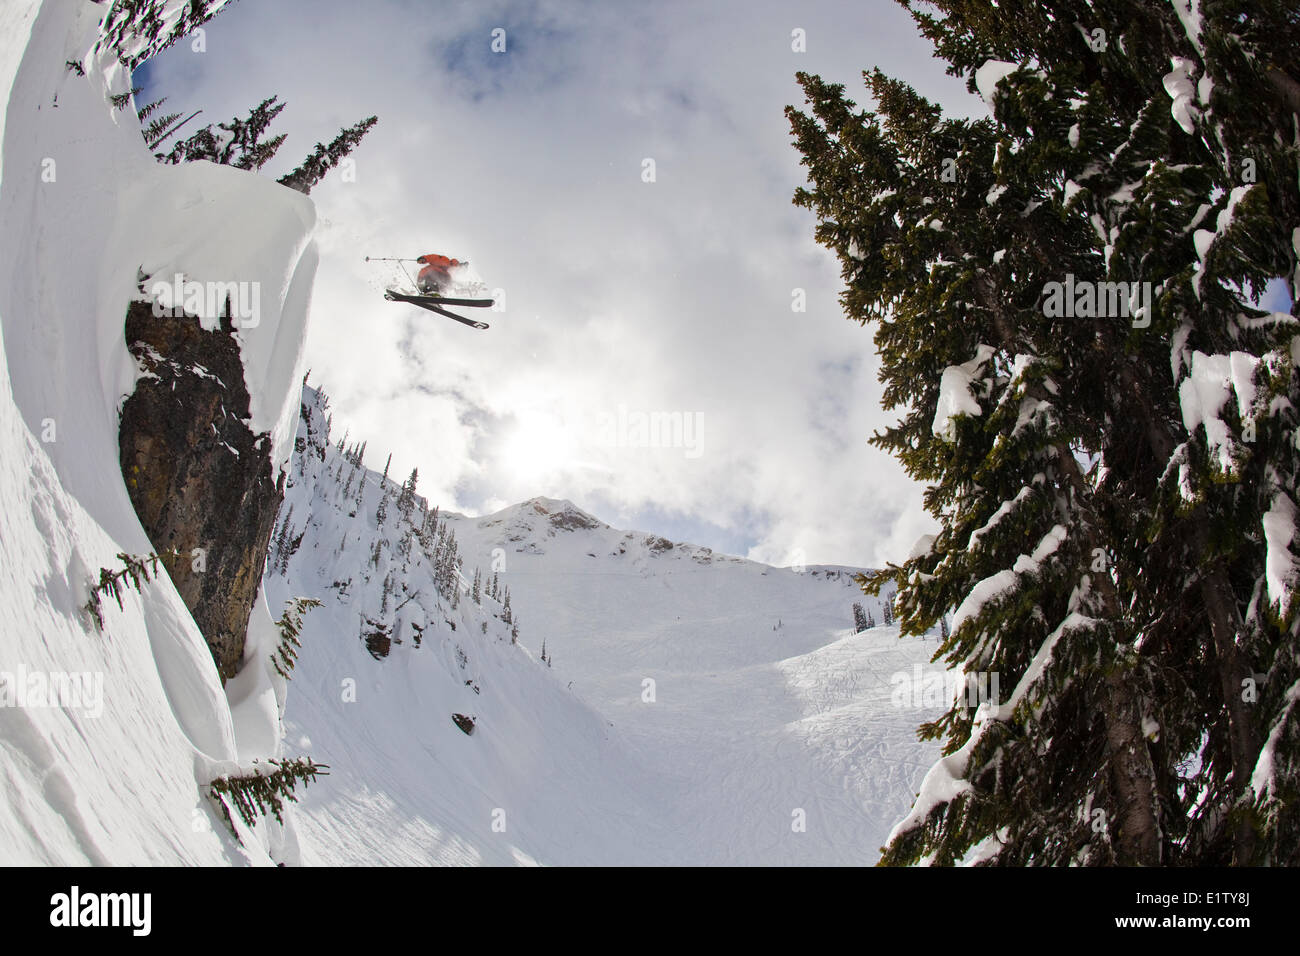 A male freeskier drops a huge cliff at Revelstoke Mtn Resort, BC Stock Photo